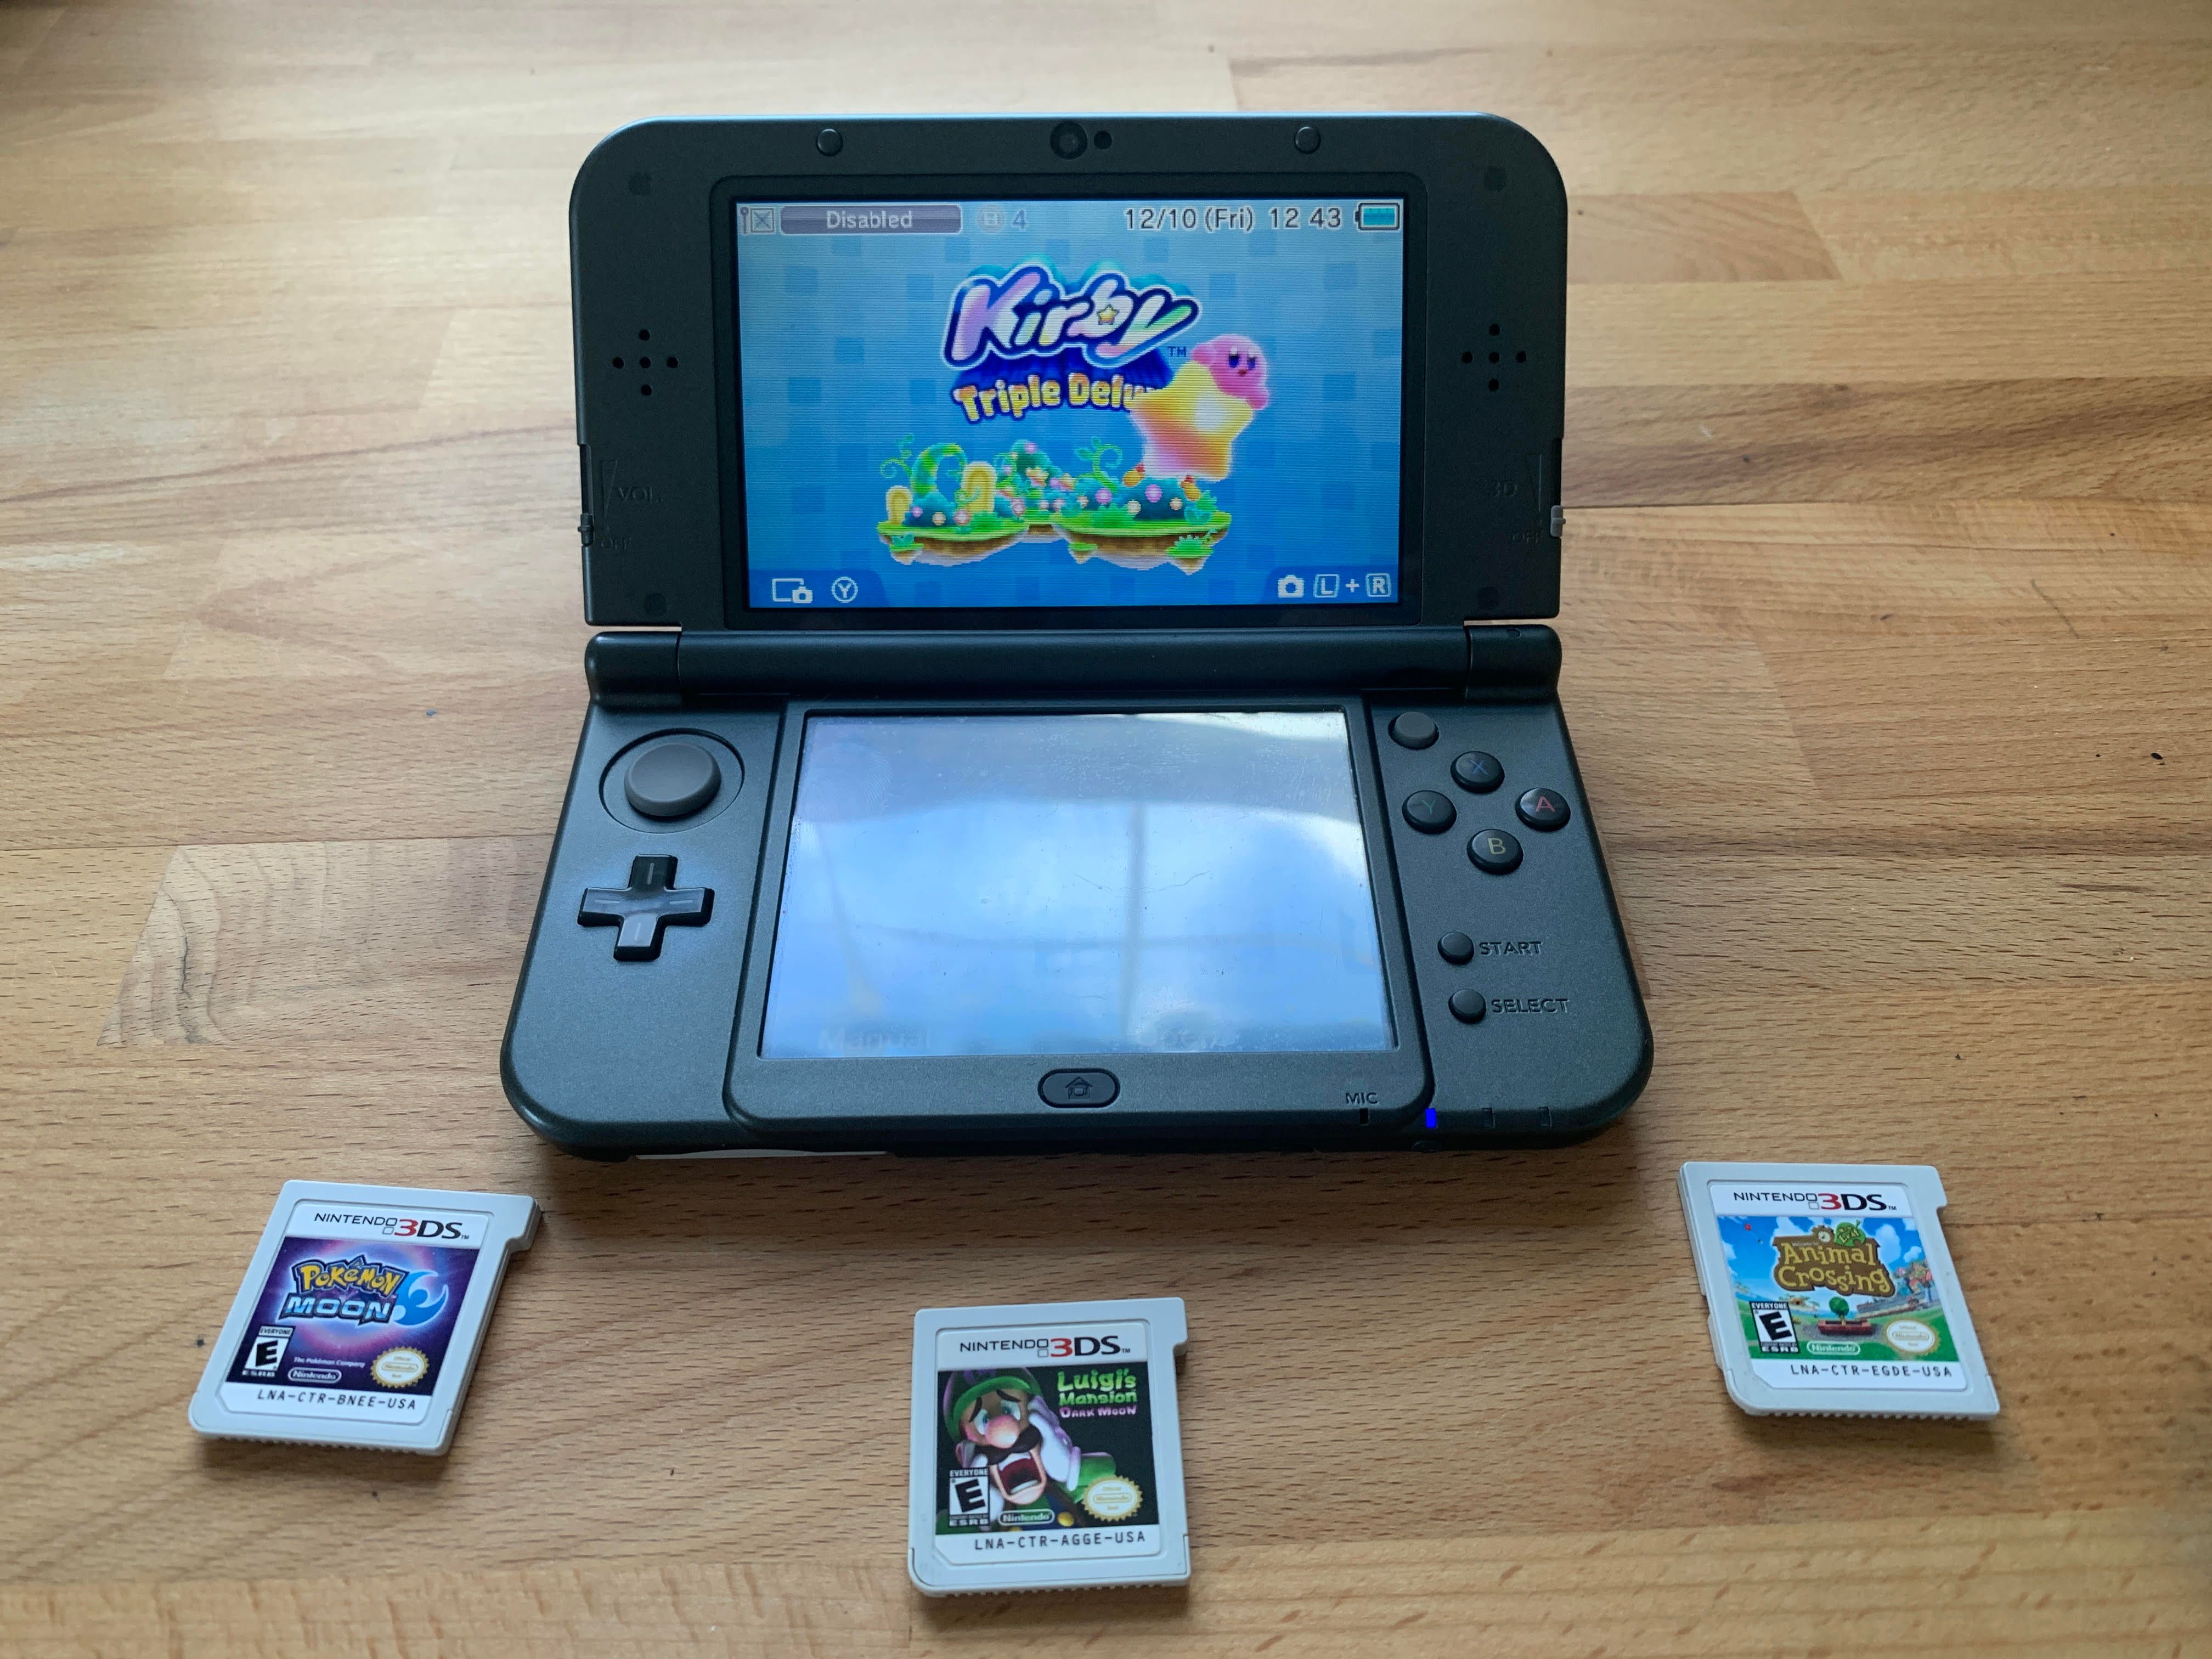 Grey New Nintendo 3DS XL Surrounded by Games